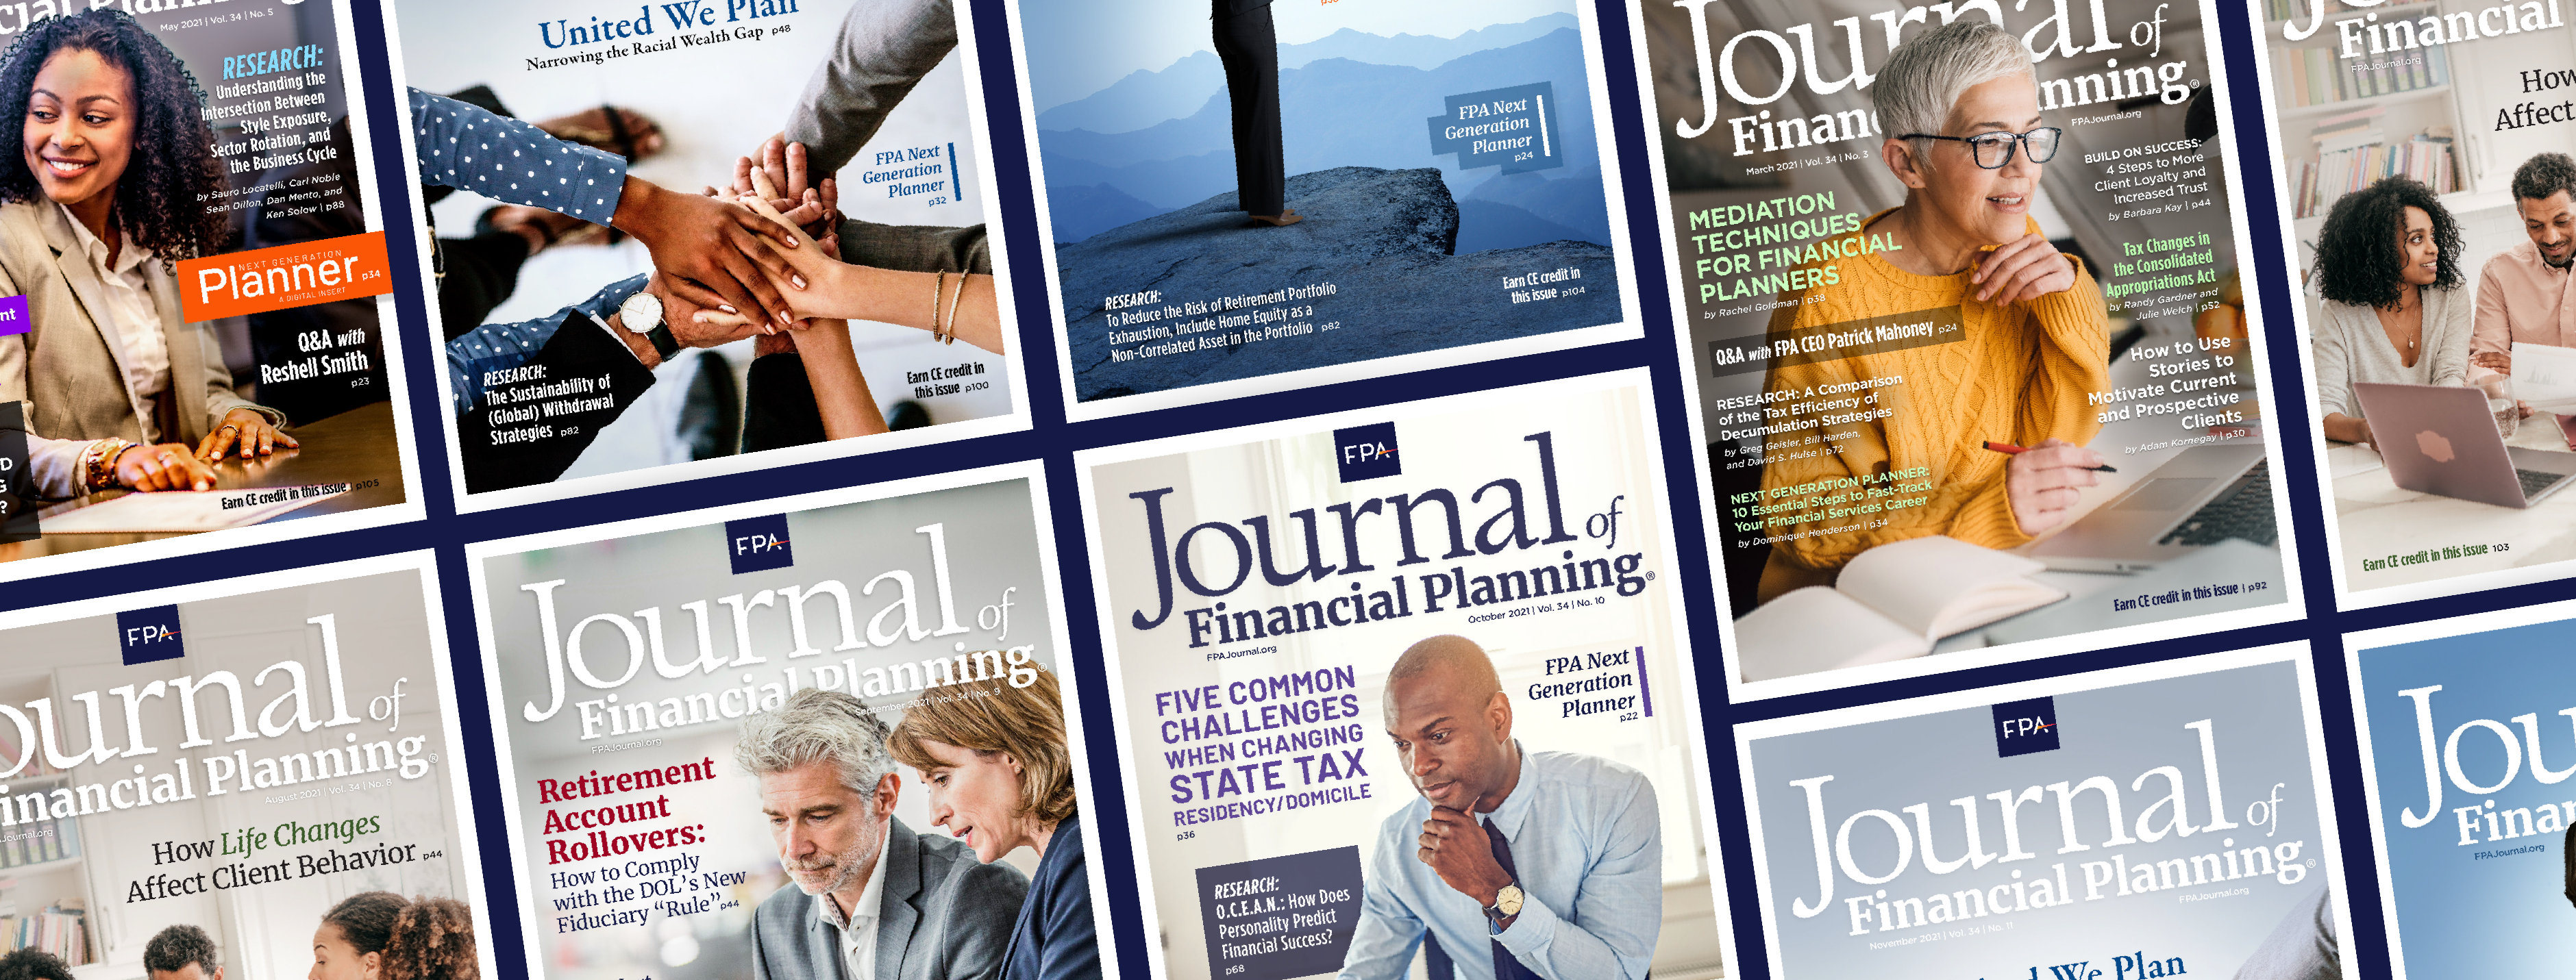 Journal of Financial Planning Image